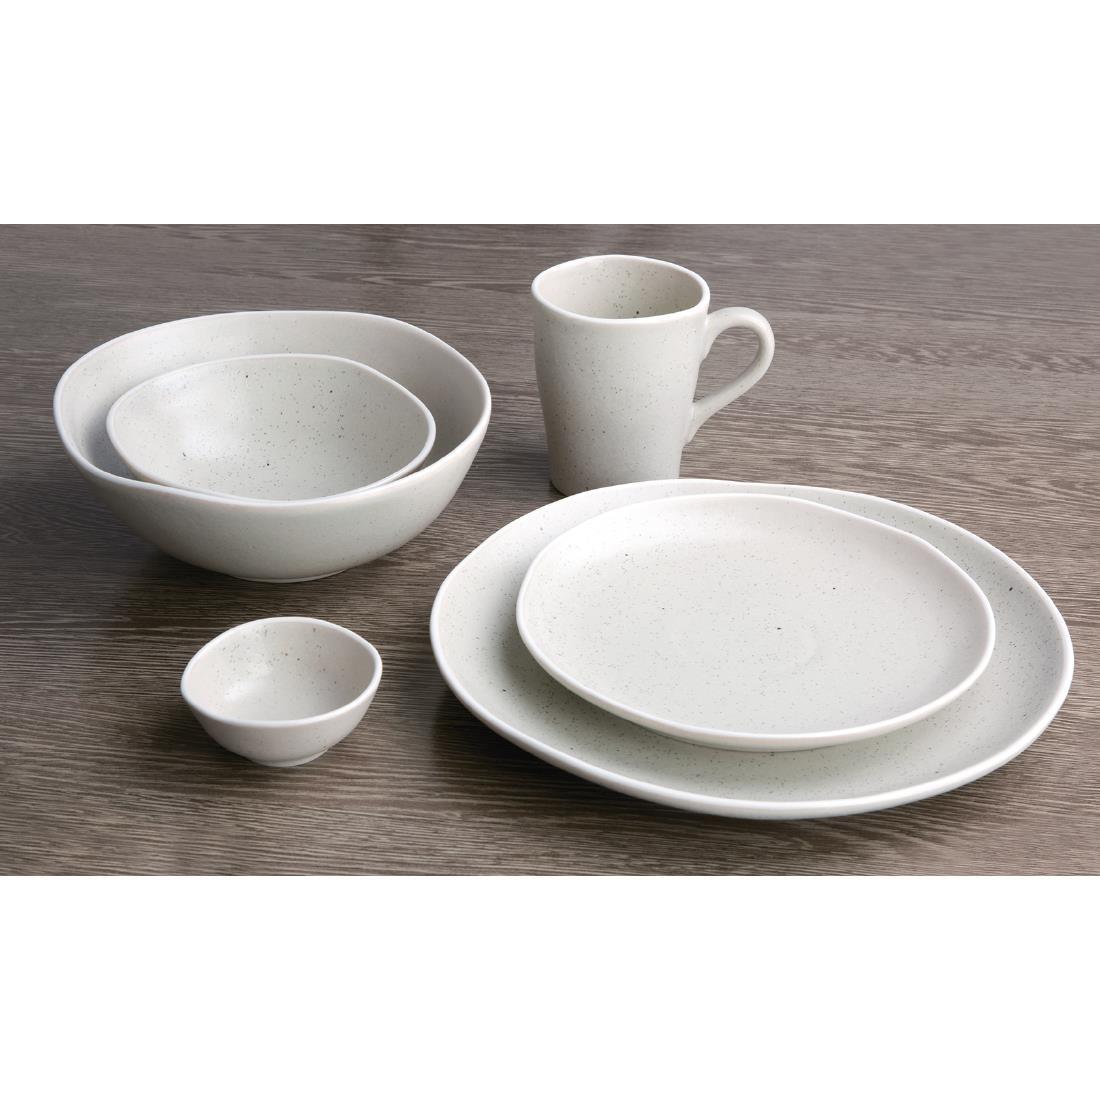 Olympia Chia Plates Sand 270mm (Pack of 6) - DR807  - 5